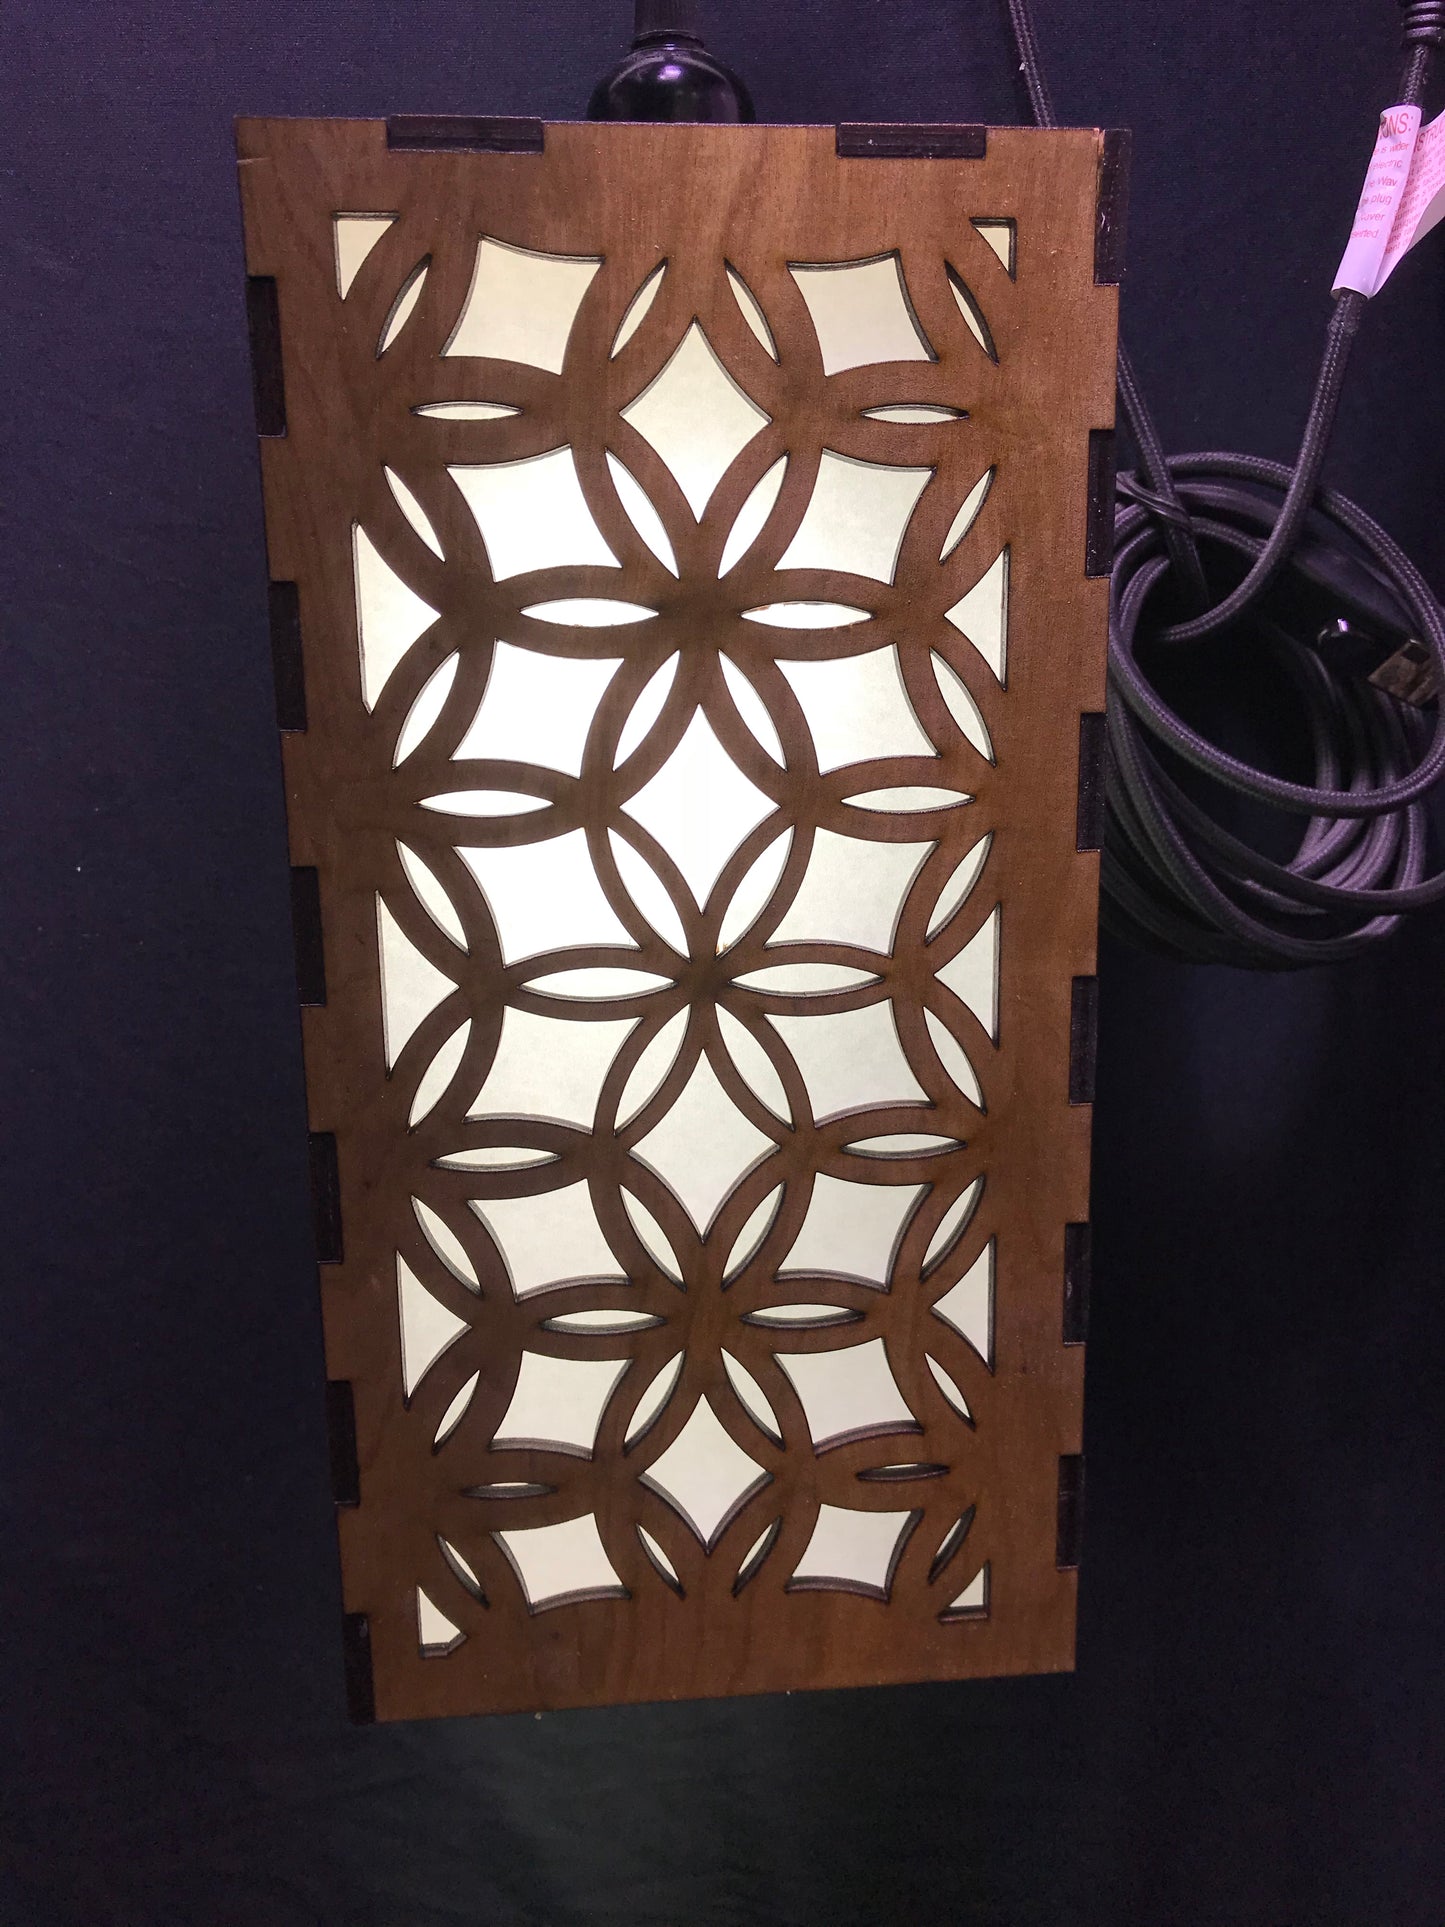 Flower of life style lamp